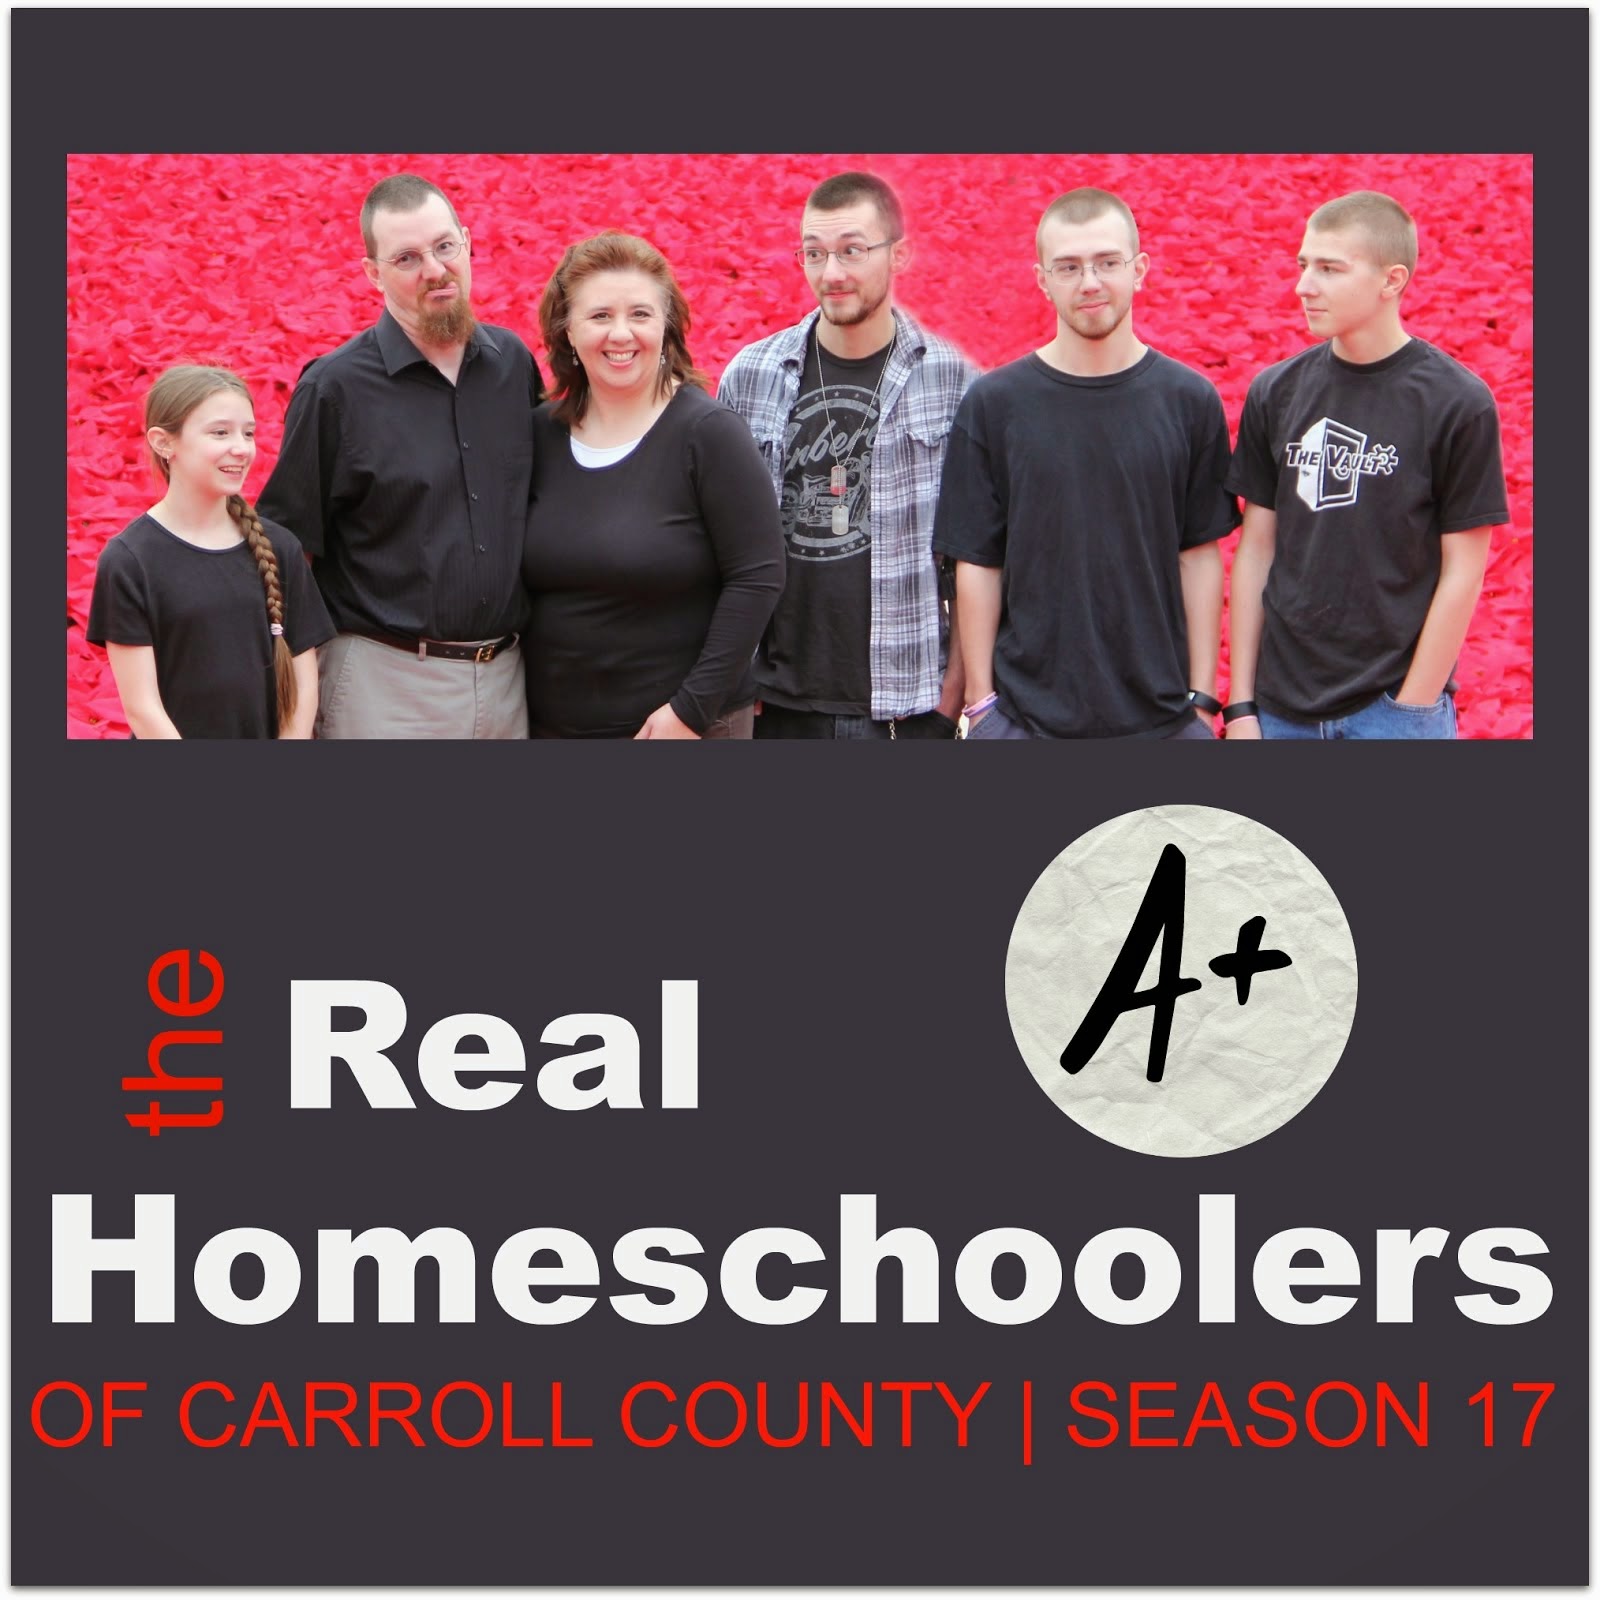 The Real Homeschoolers (Spring 2015)